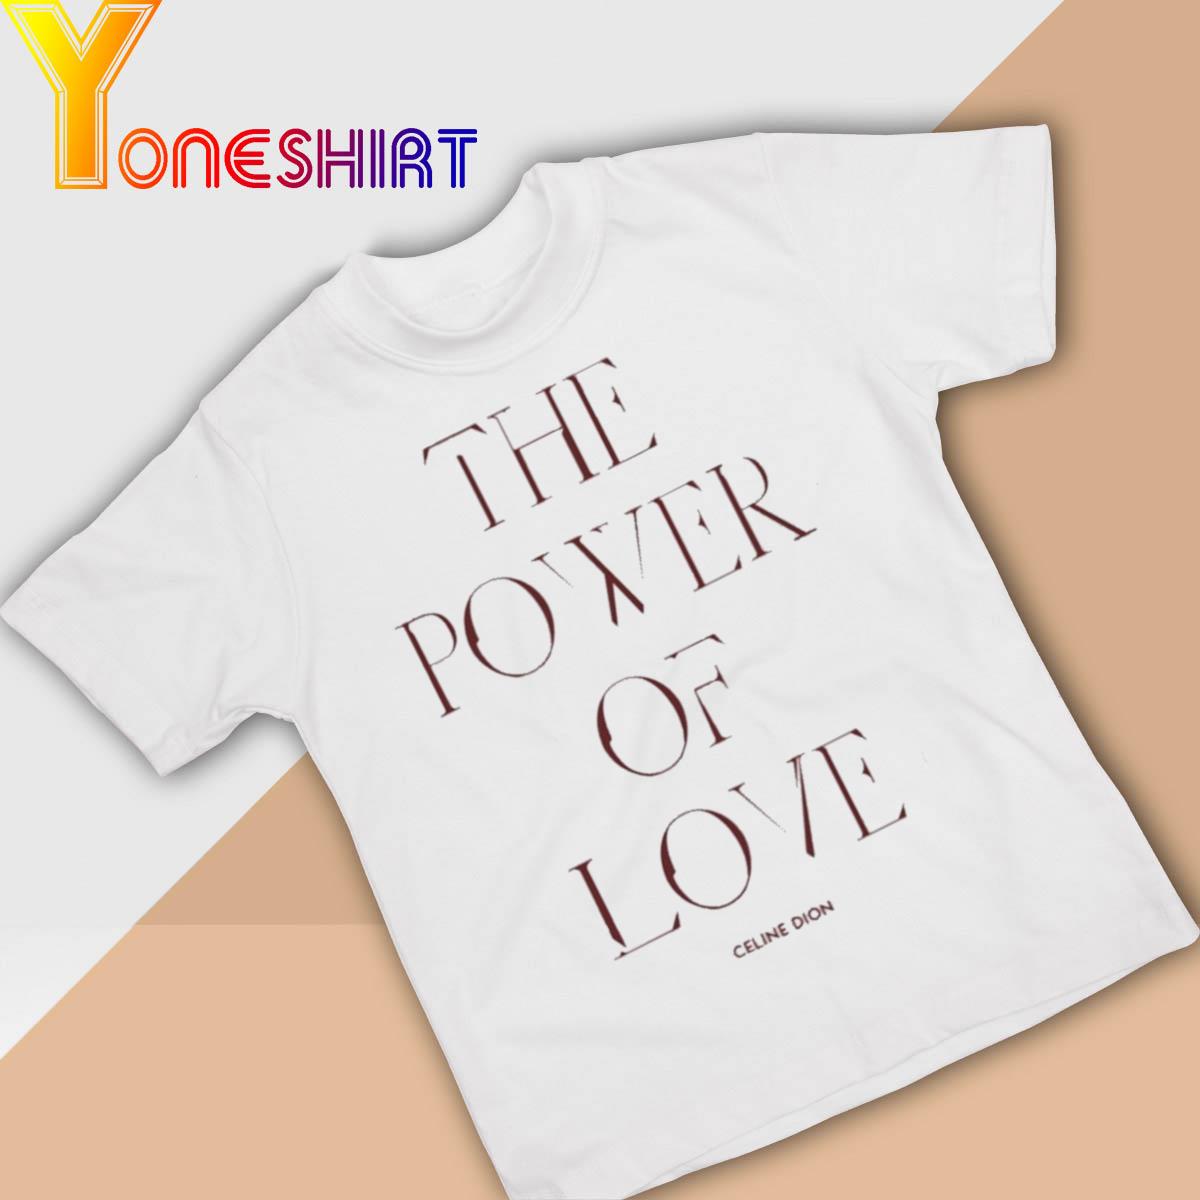 The Power Of Love Celine Dion Shirt